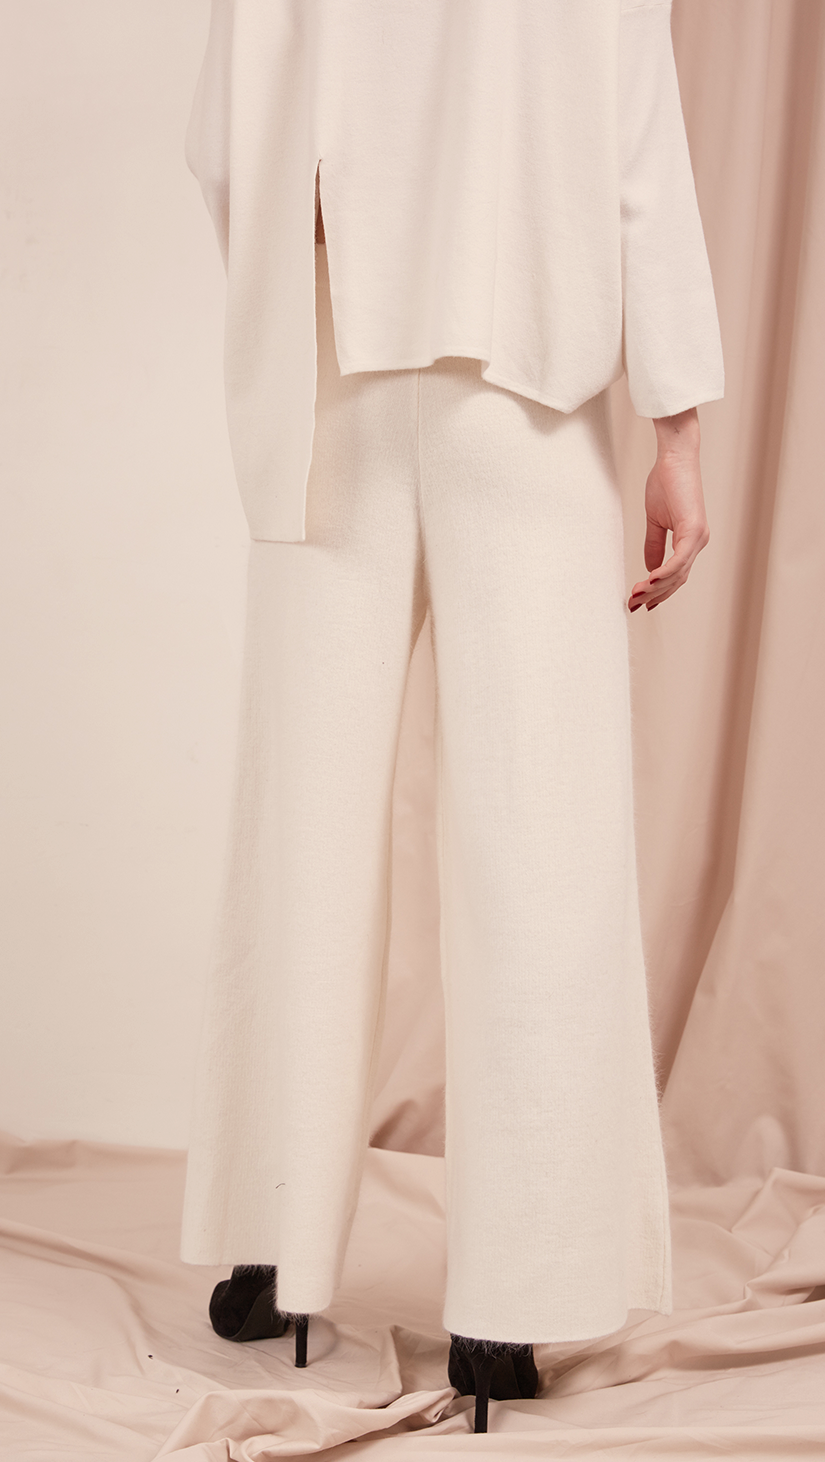 The Hari Pant is off white wide trouser sit high on the waist with an elasticated ribbed Angora knit trim. Wide leg cut. No pocket. Warm and super soft wool fabric. Relaxed fit. Particularly wide hem.